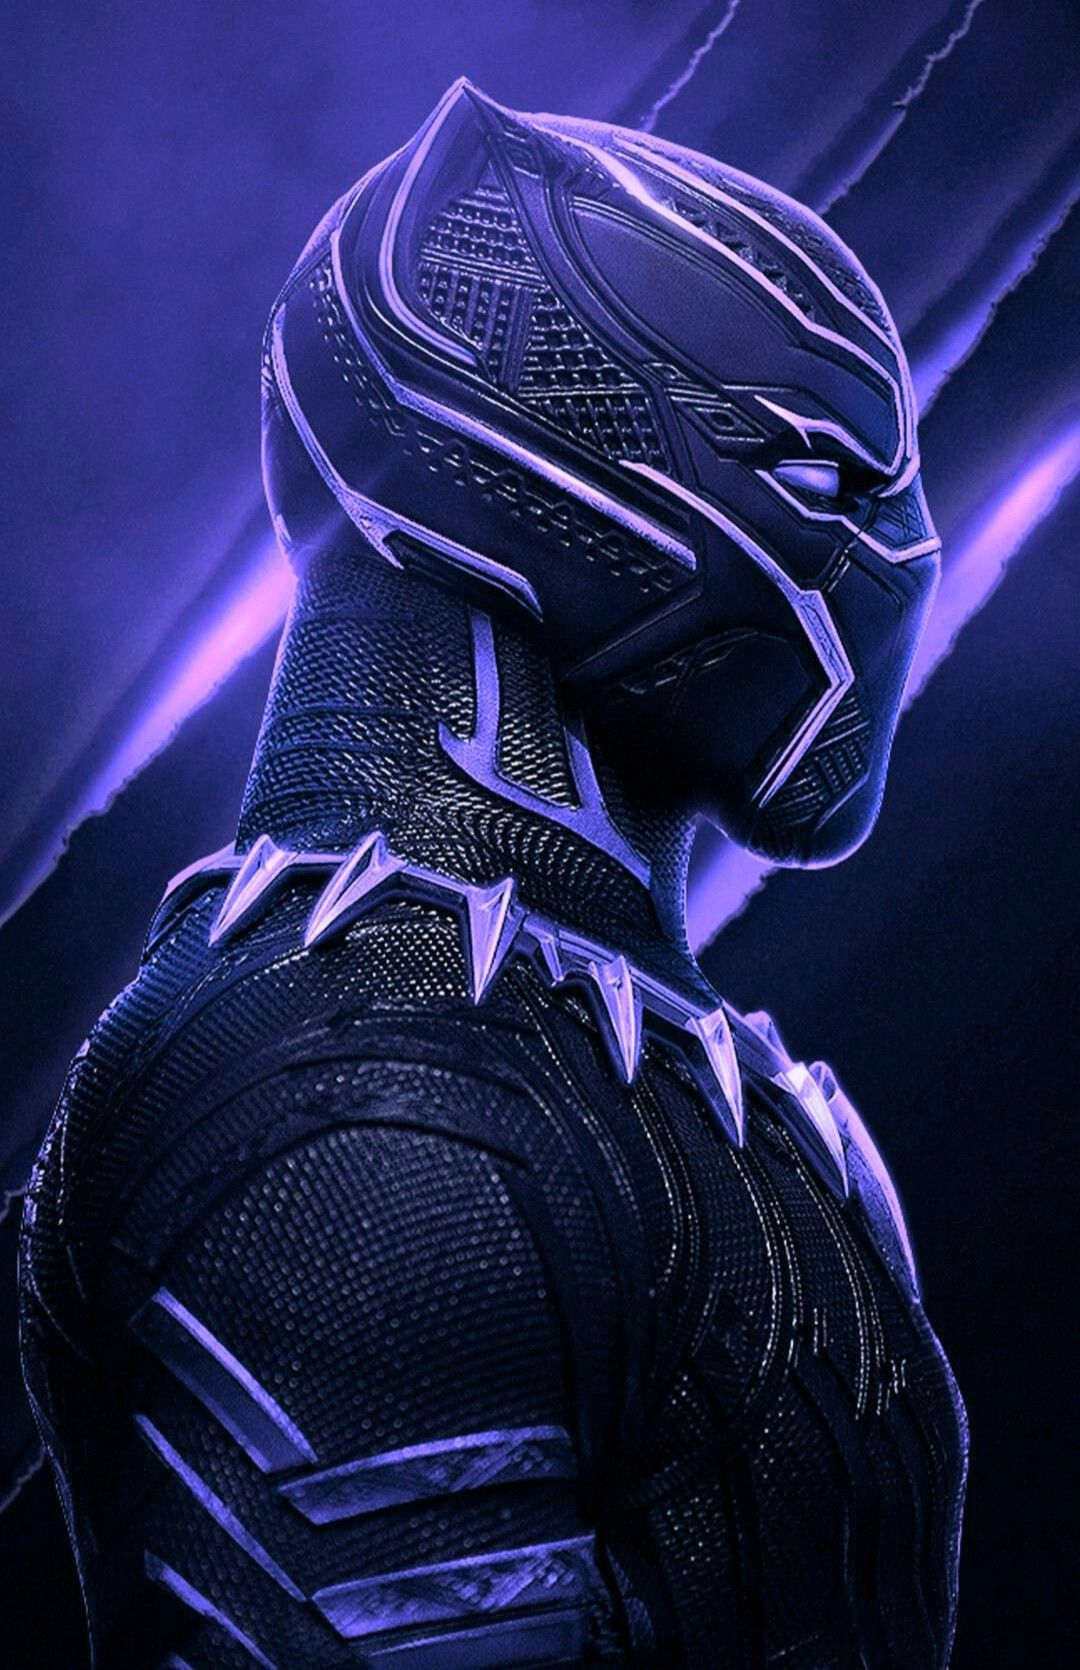 Black Panther Purple Wallpapers - Wallpaper Cave